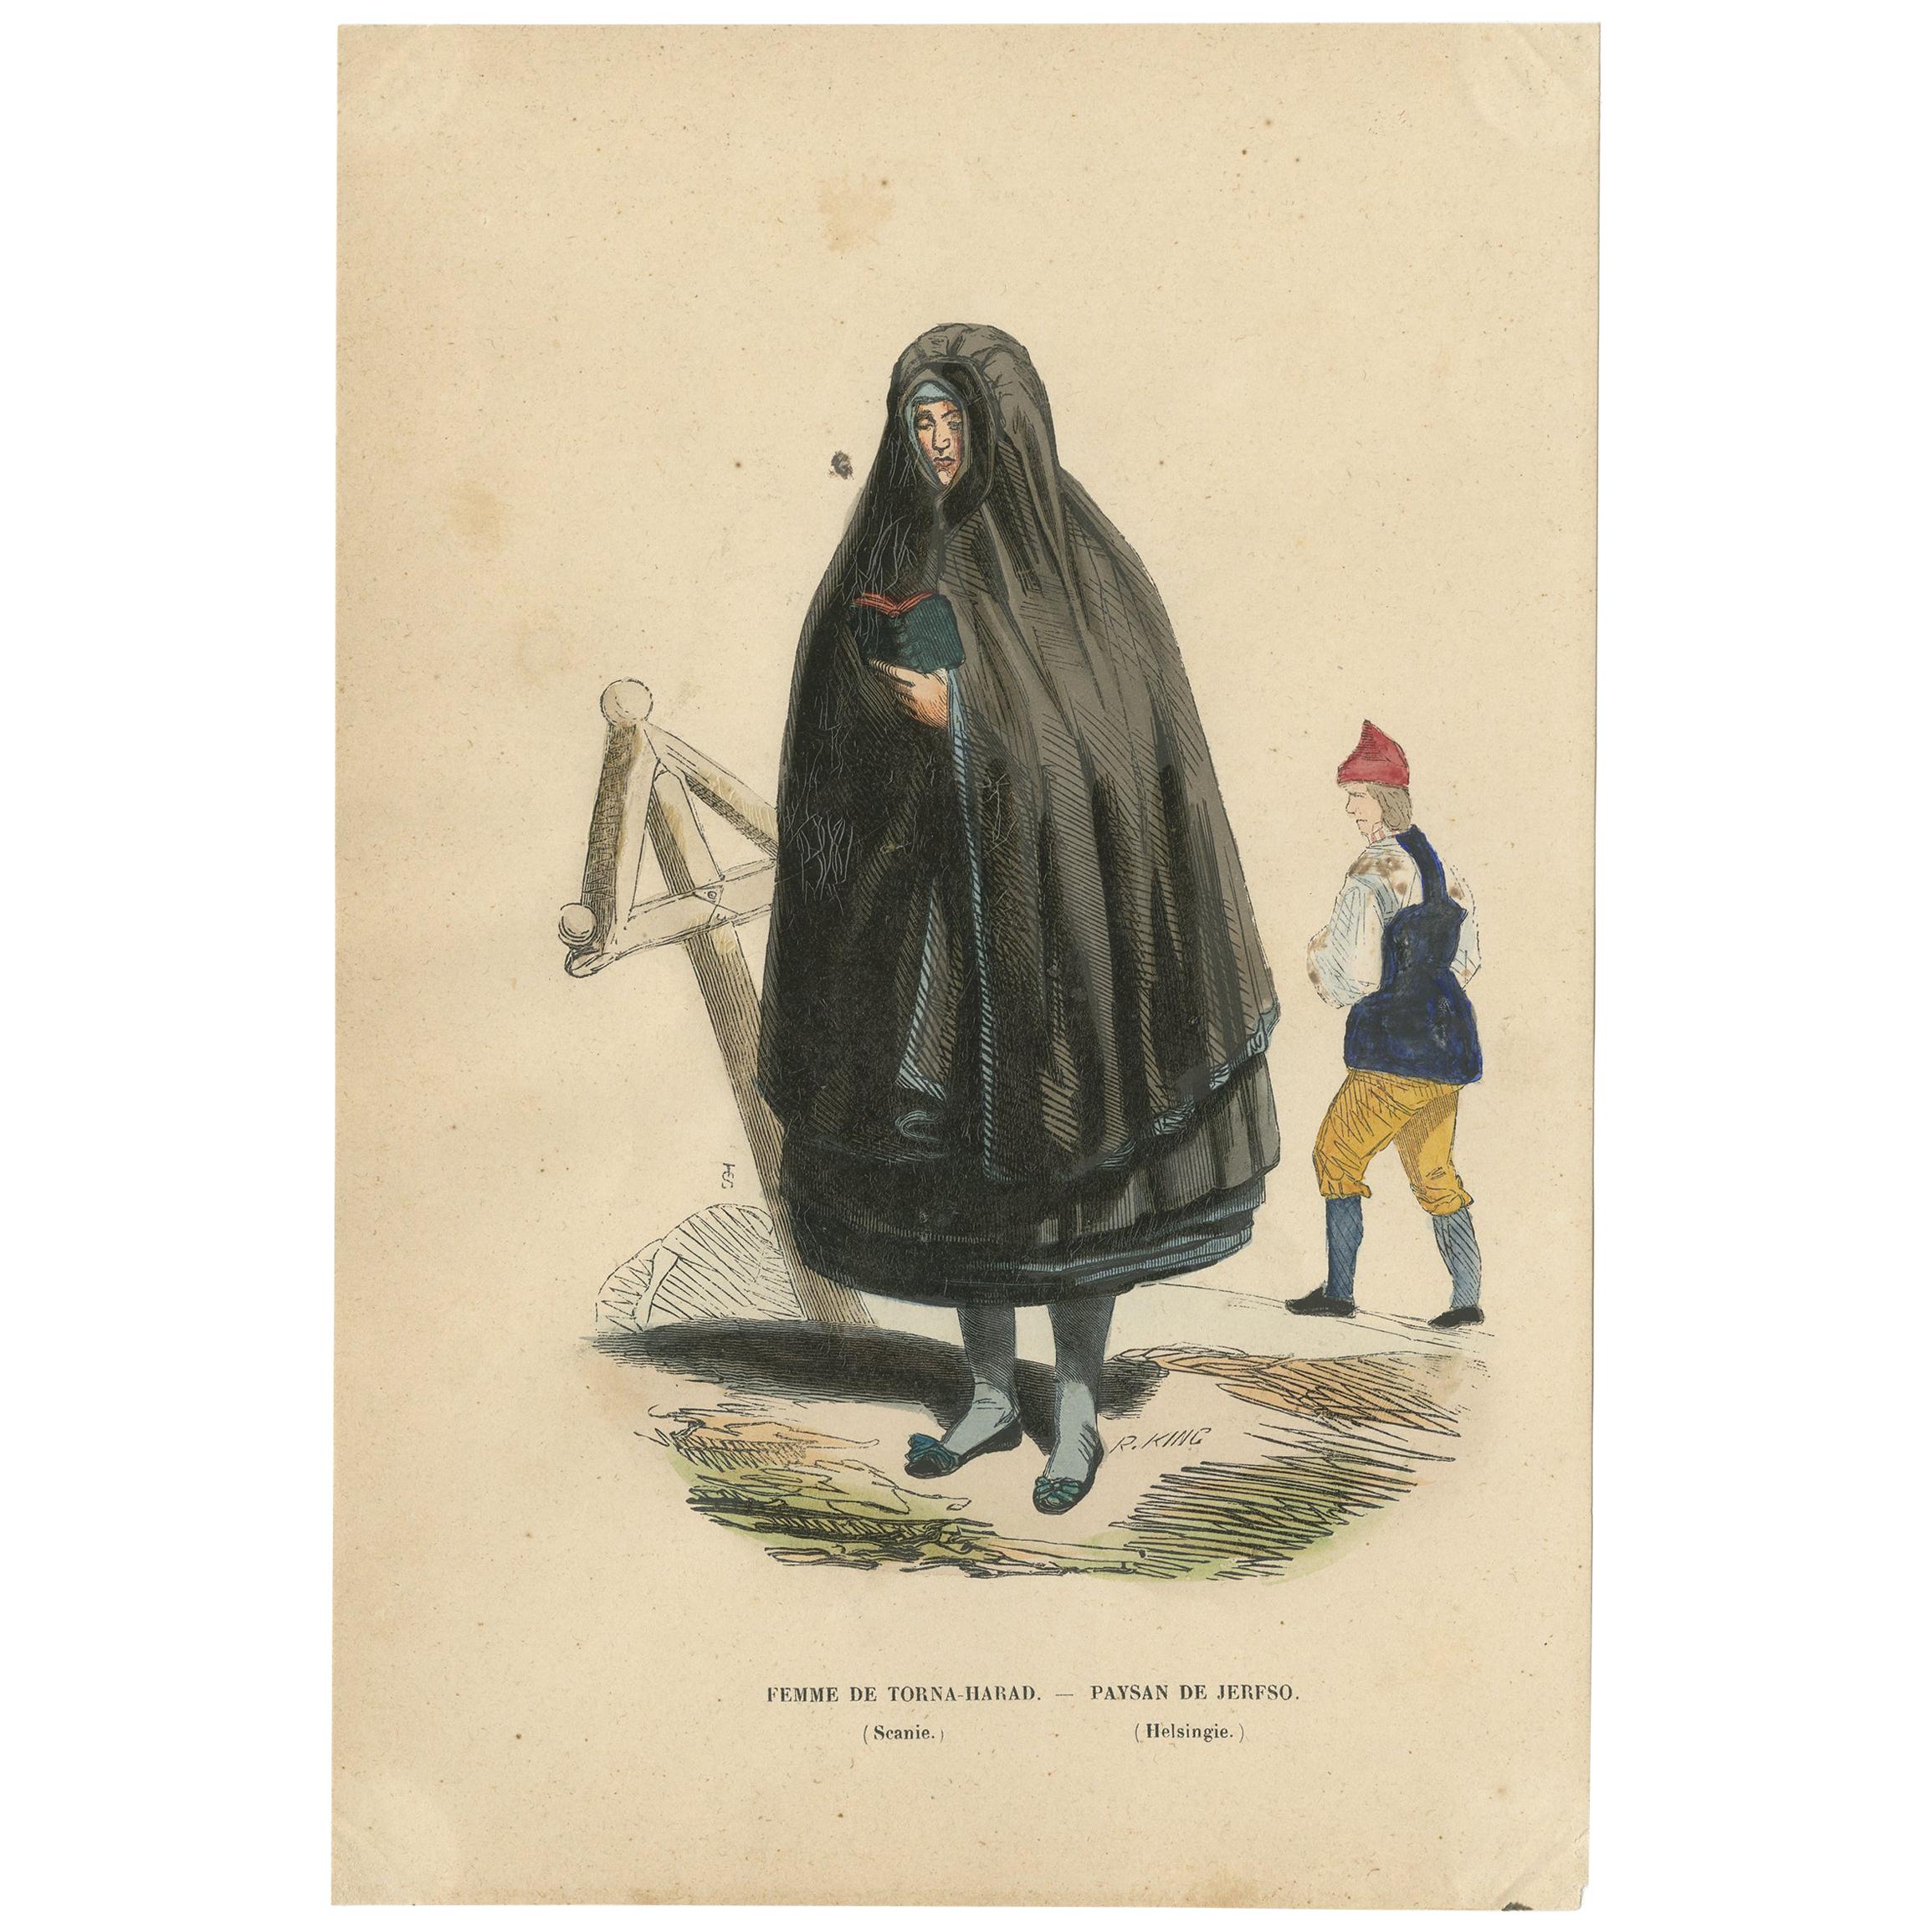 Antique Costume Print of a Female and Peasant in Scandinavian Costume by Wahlen For Sale